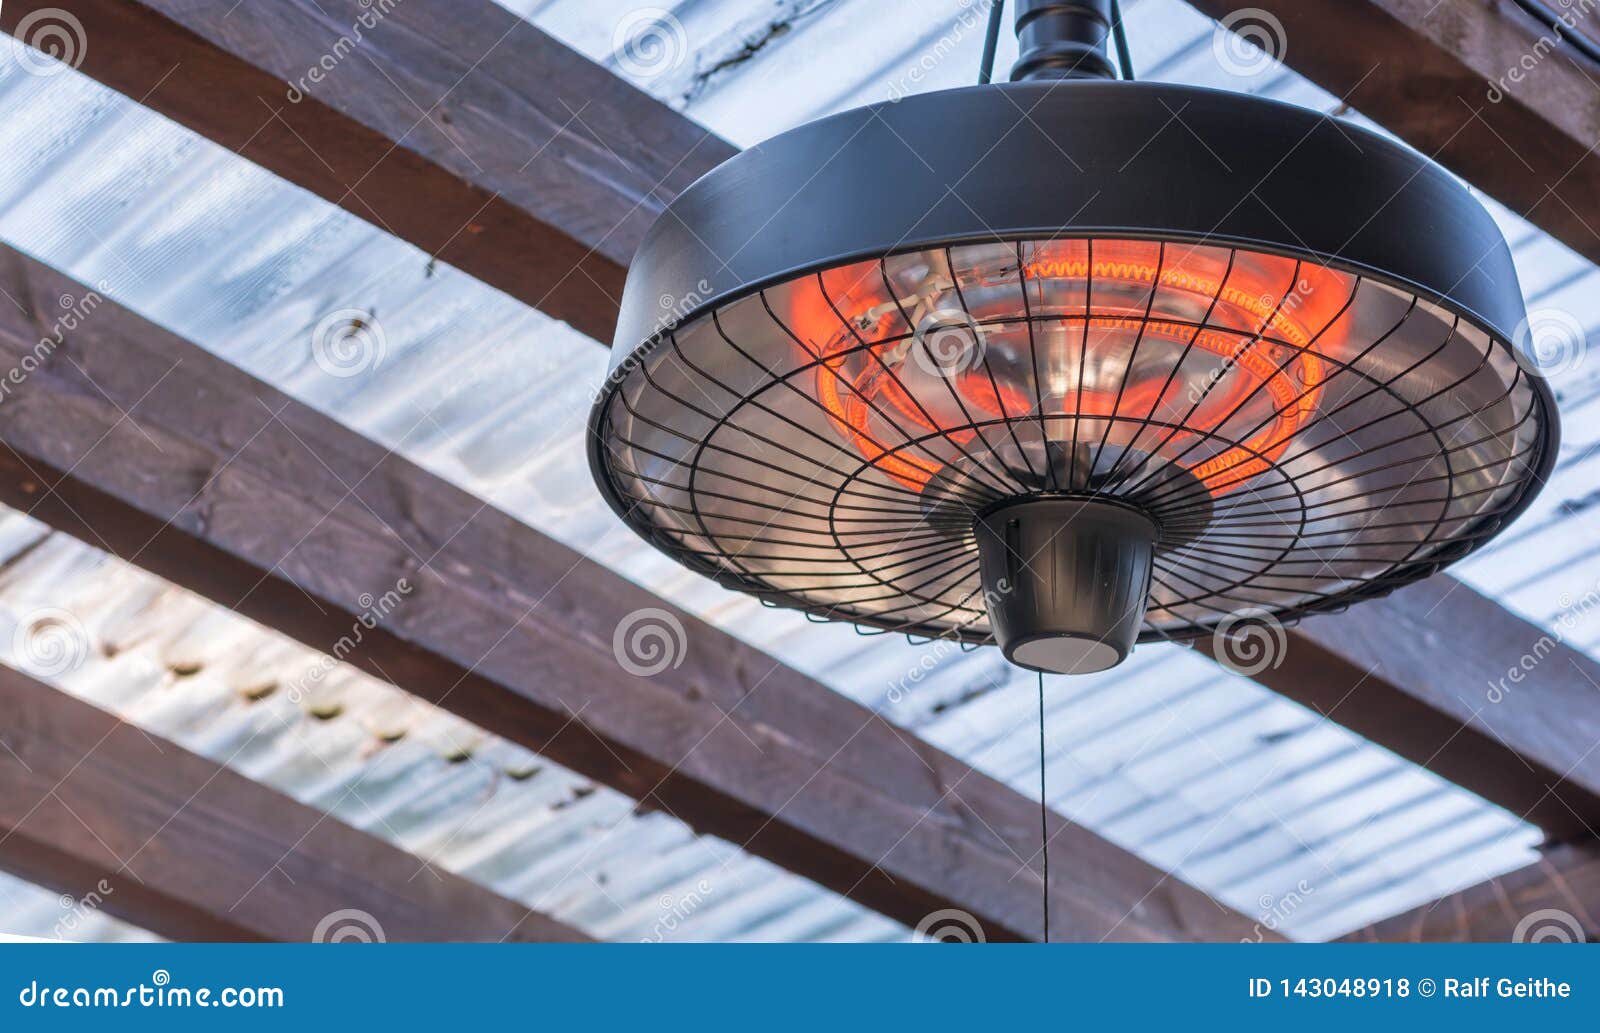 Radiant Heater On The Ceiling Of A Terrace Roofing Stock